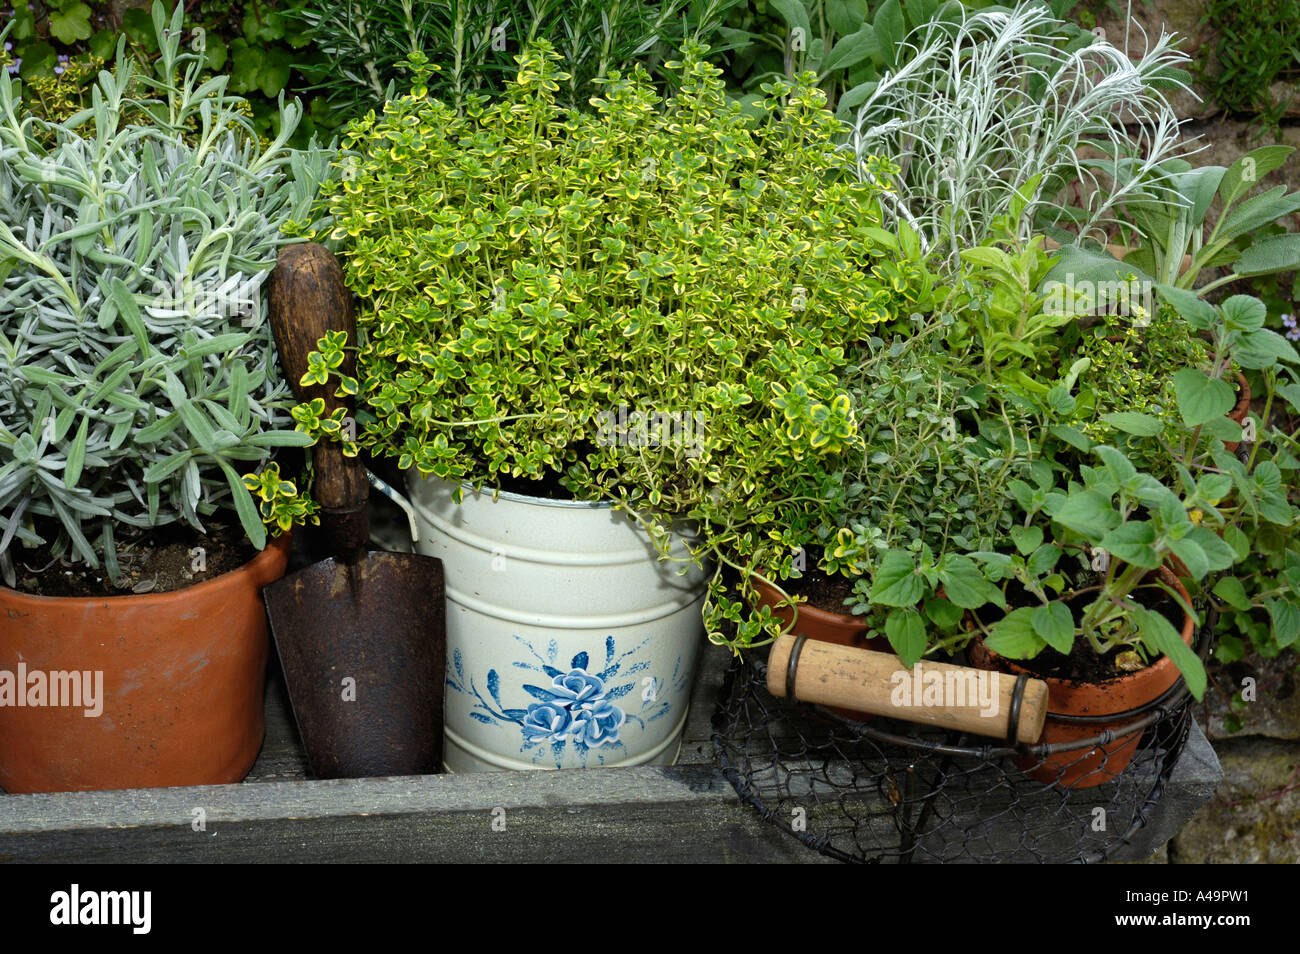 Several herbs in pots Stock Photo